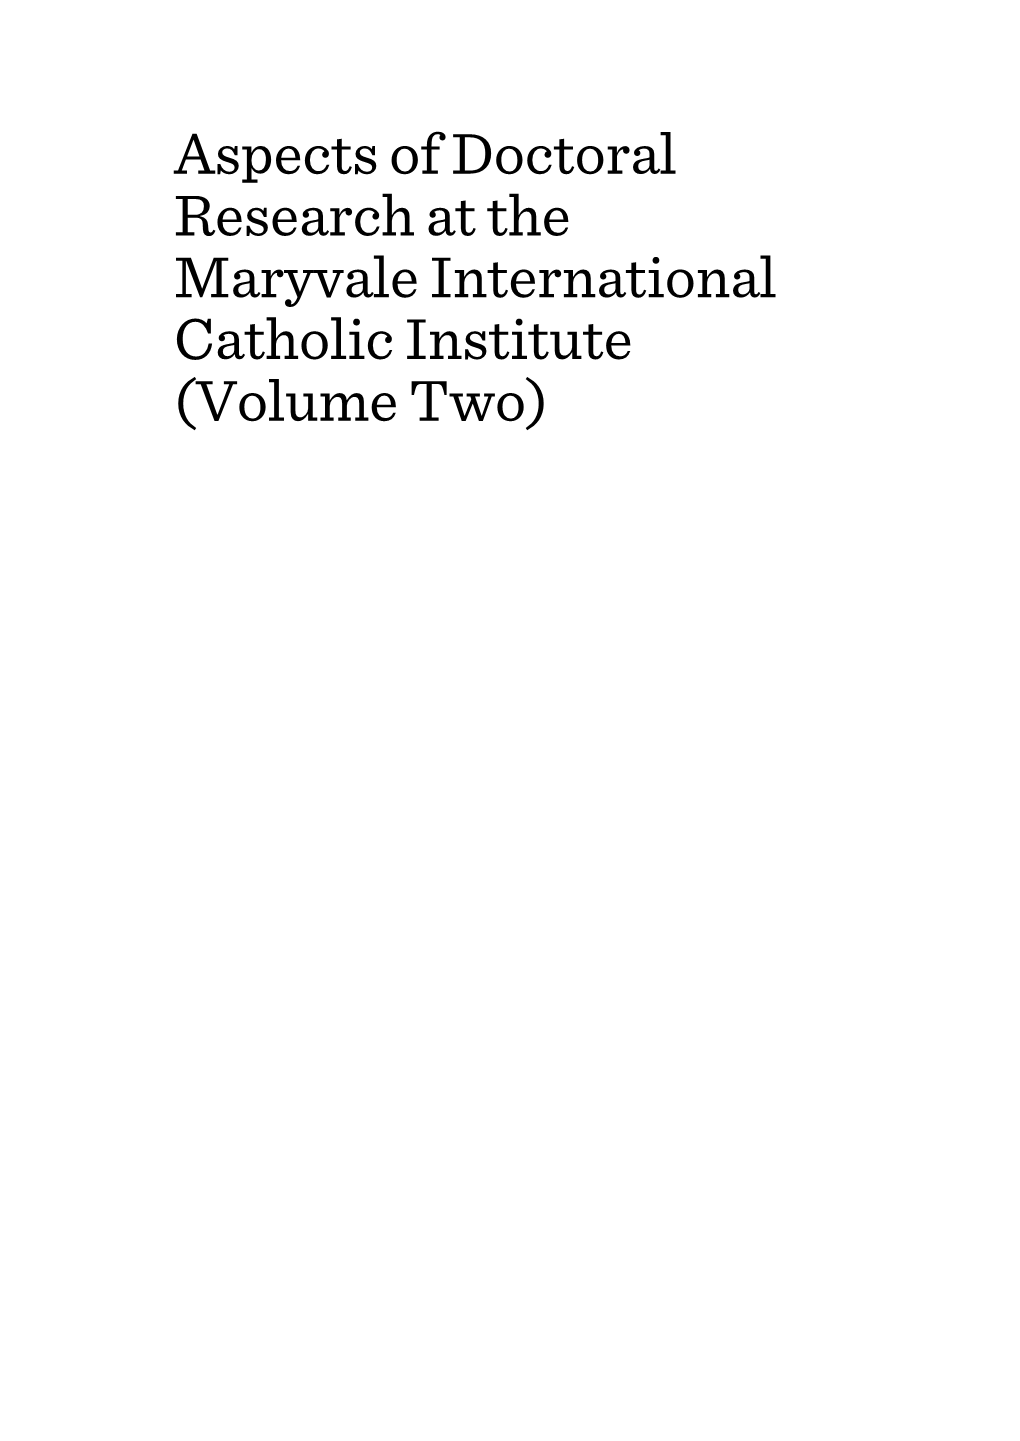 Aspects of Doctoral Research at the Maryvale International Catholic Institute (Volume Two)